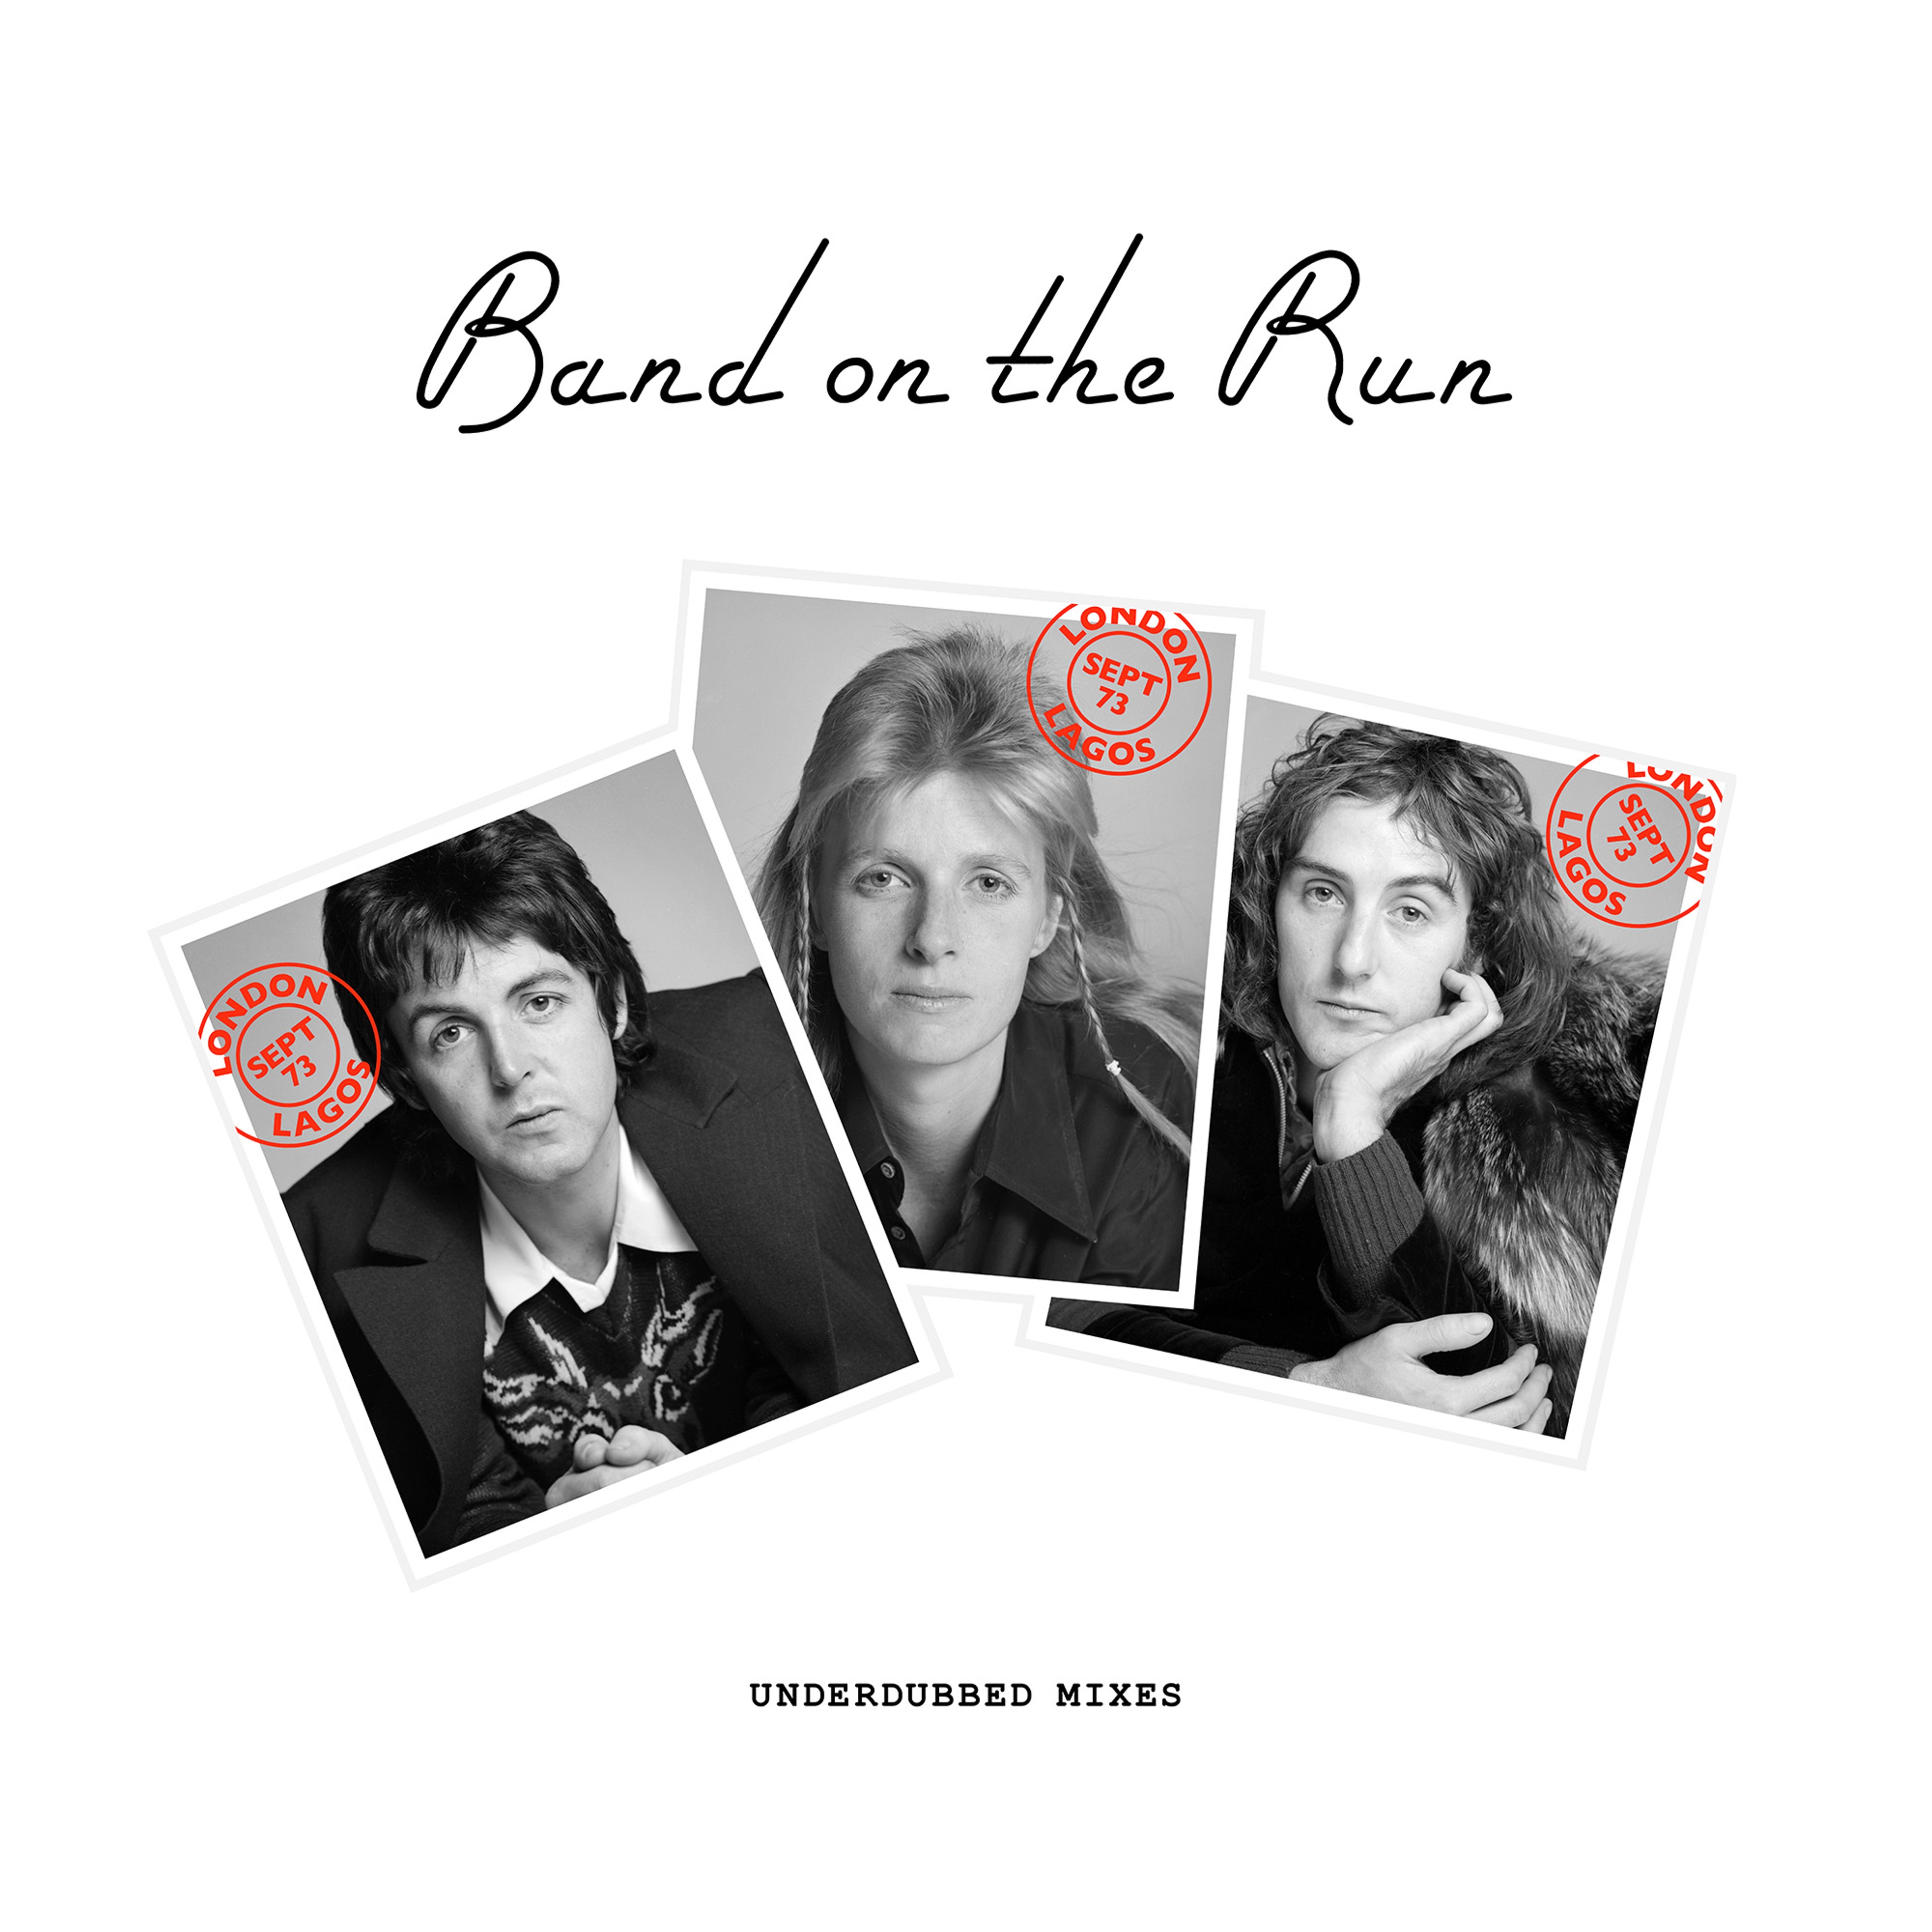 Photos of Paul, Linda and Denny Laine for Band on the Ru 50th anniversary edition